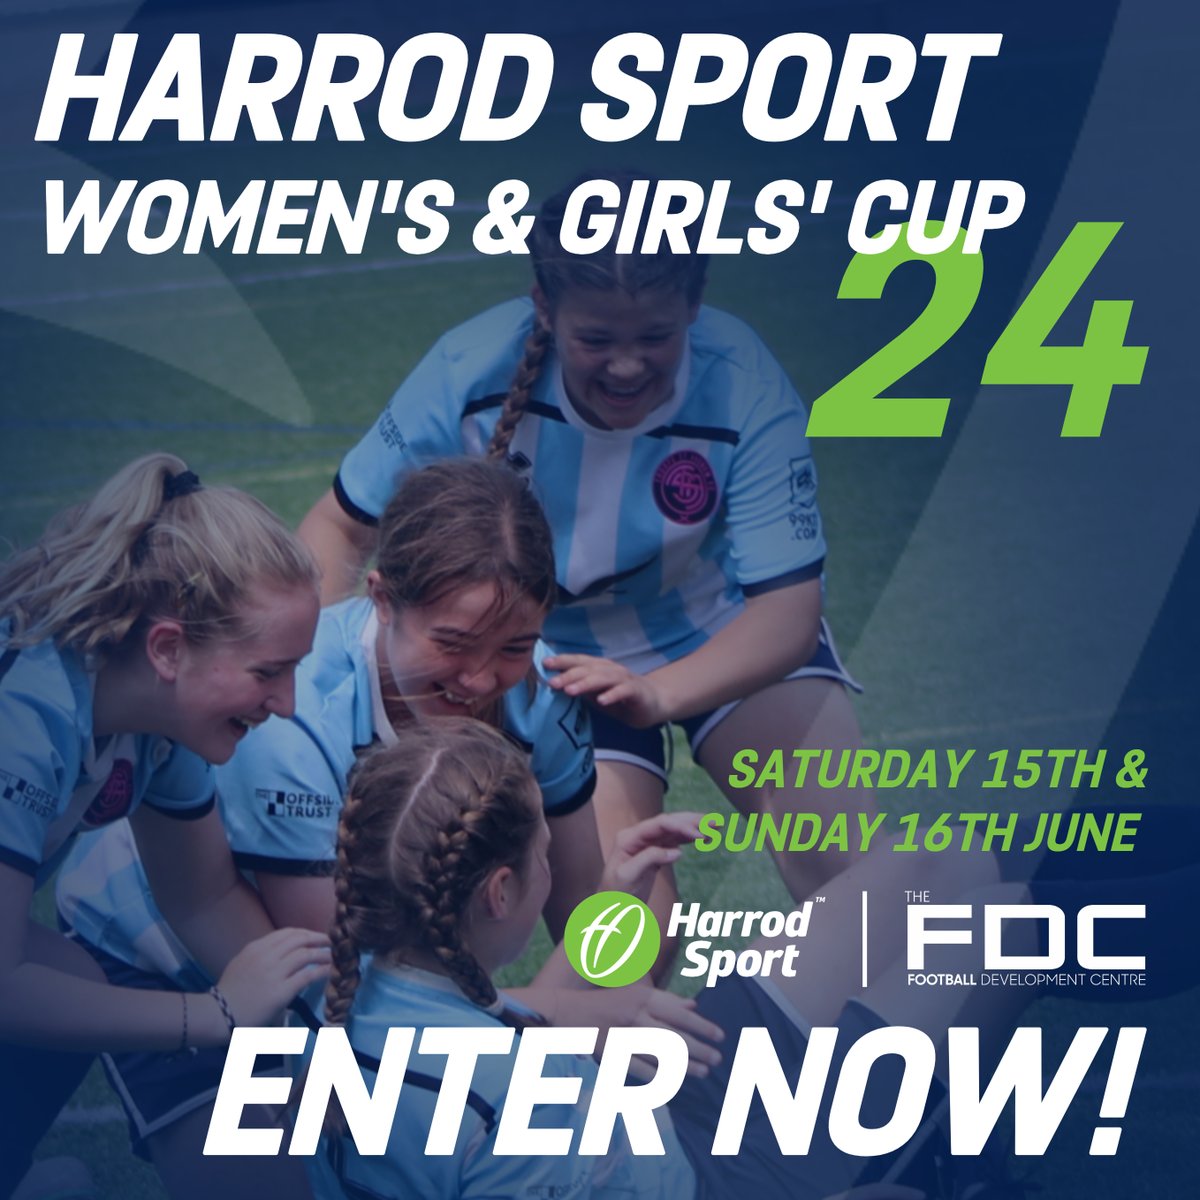 Don't miss out on the chance to get entered for the @HarrodSport Women's & Girls' Cup returning this summer on the weekend of 15th & 16th June ☀️⚽ Check out the remaining availability 👇 pitchbooking.com/book/event/551…